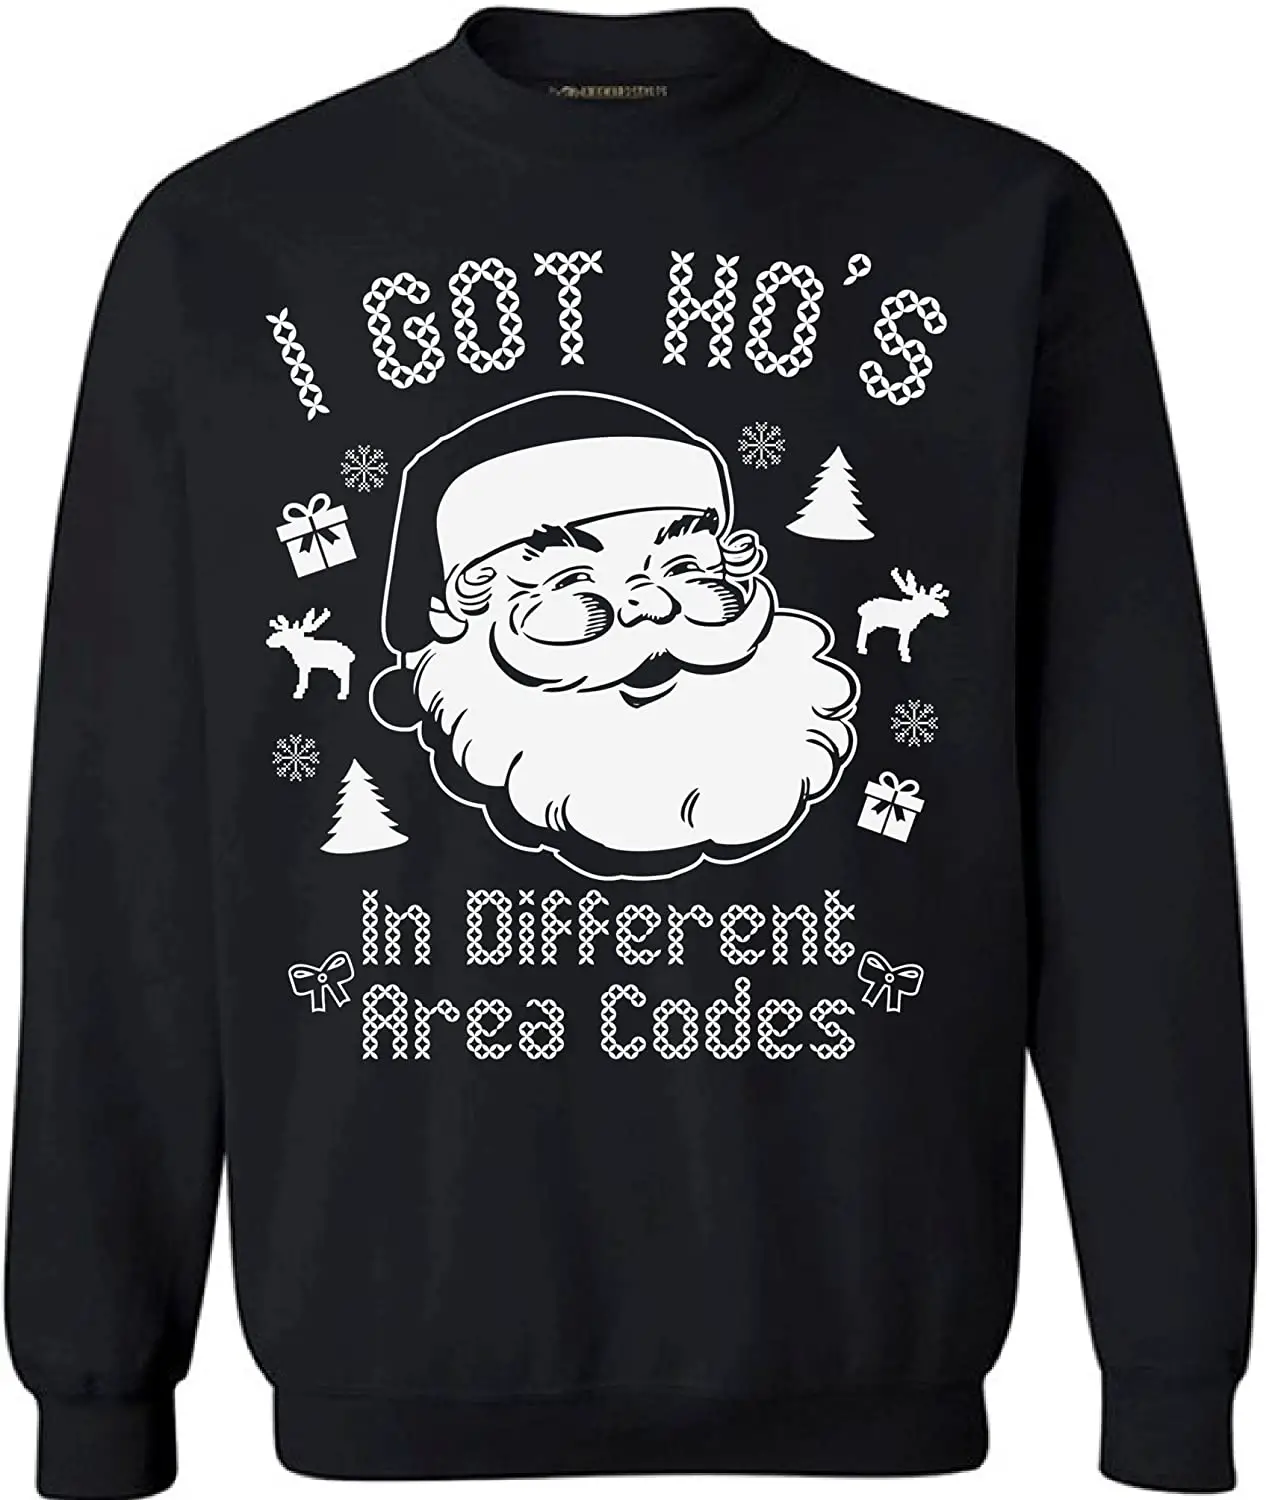 Funny Plus Size Christmas Sweaters 10